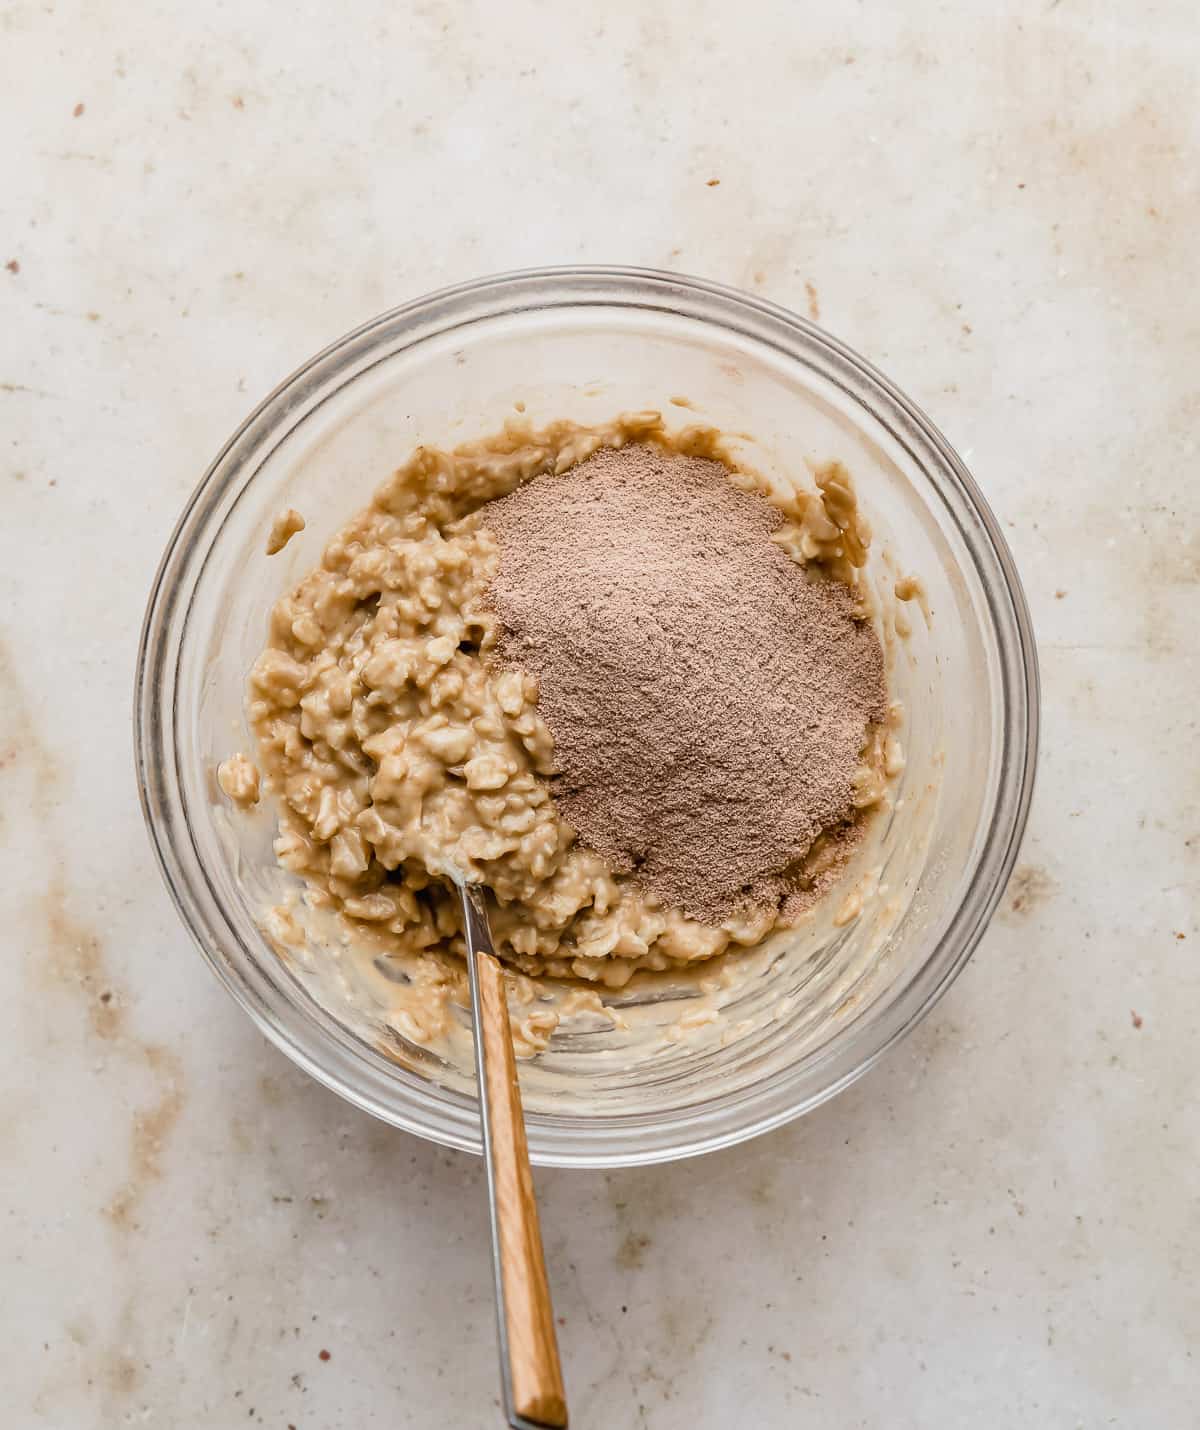 Peanut butter oatmeal with chocolate protein powder on top of it.